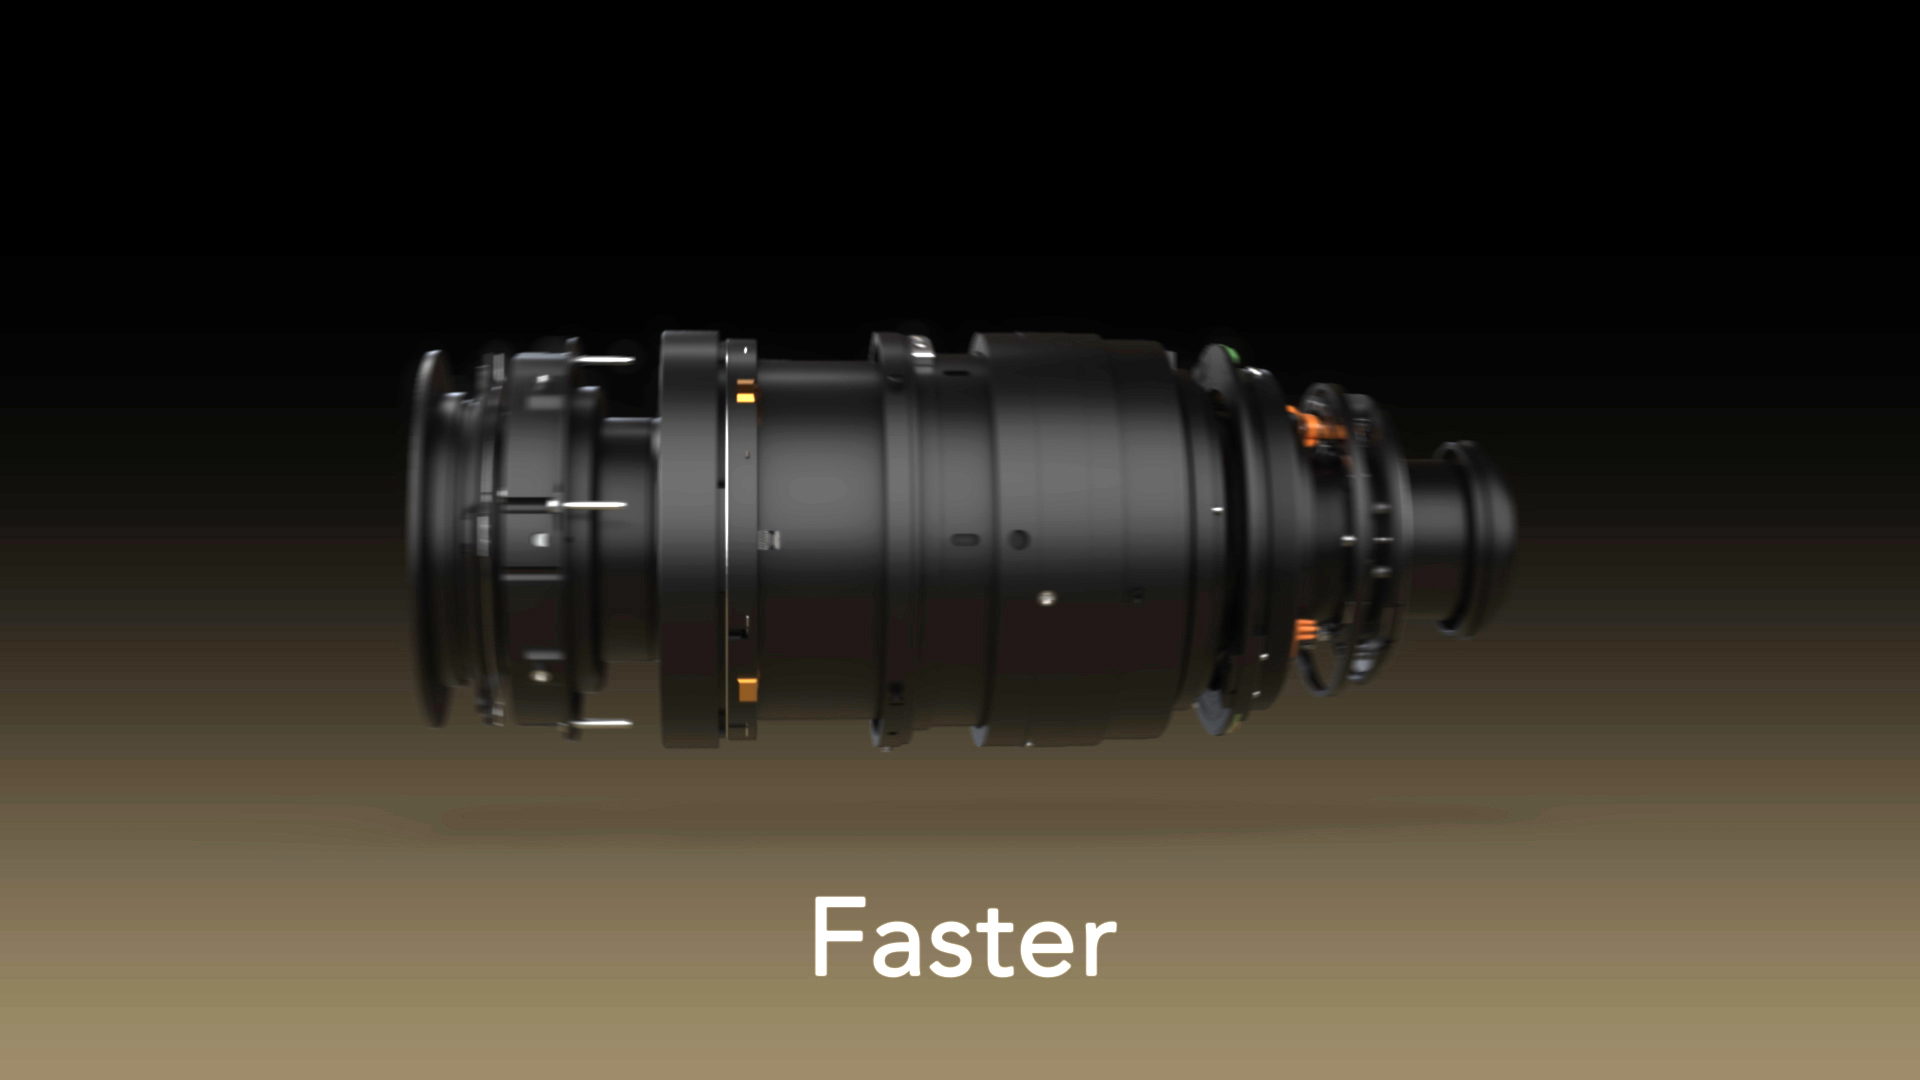 A partially deconstructed Cooke camera lense with the text 'Fast' below